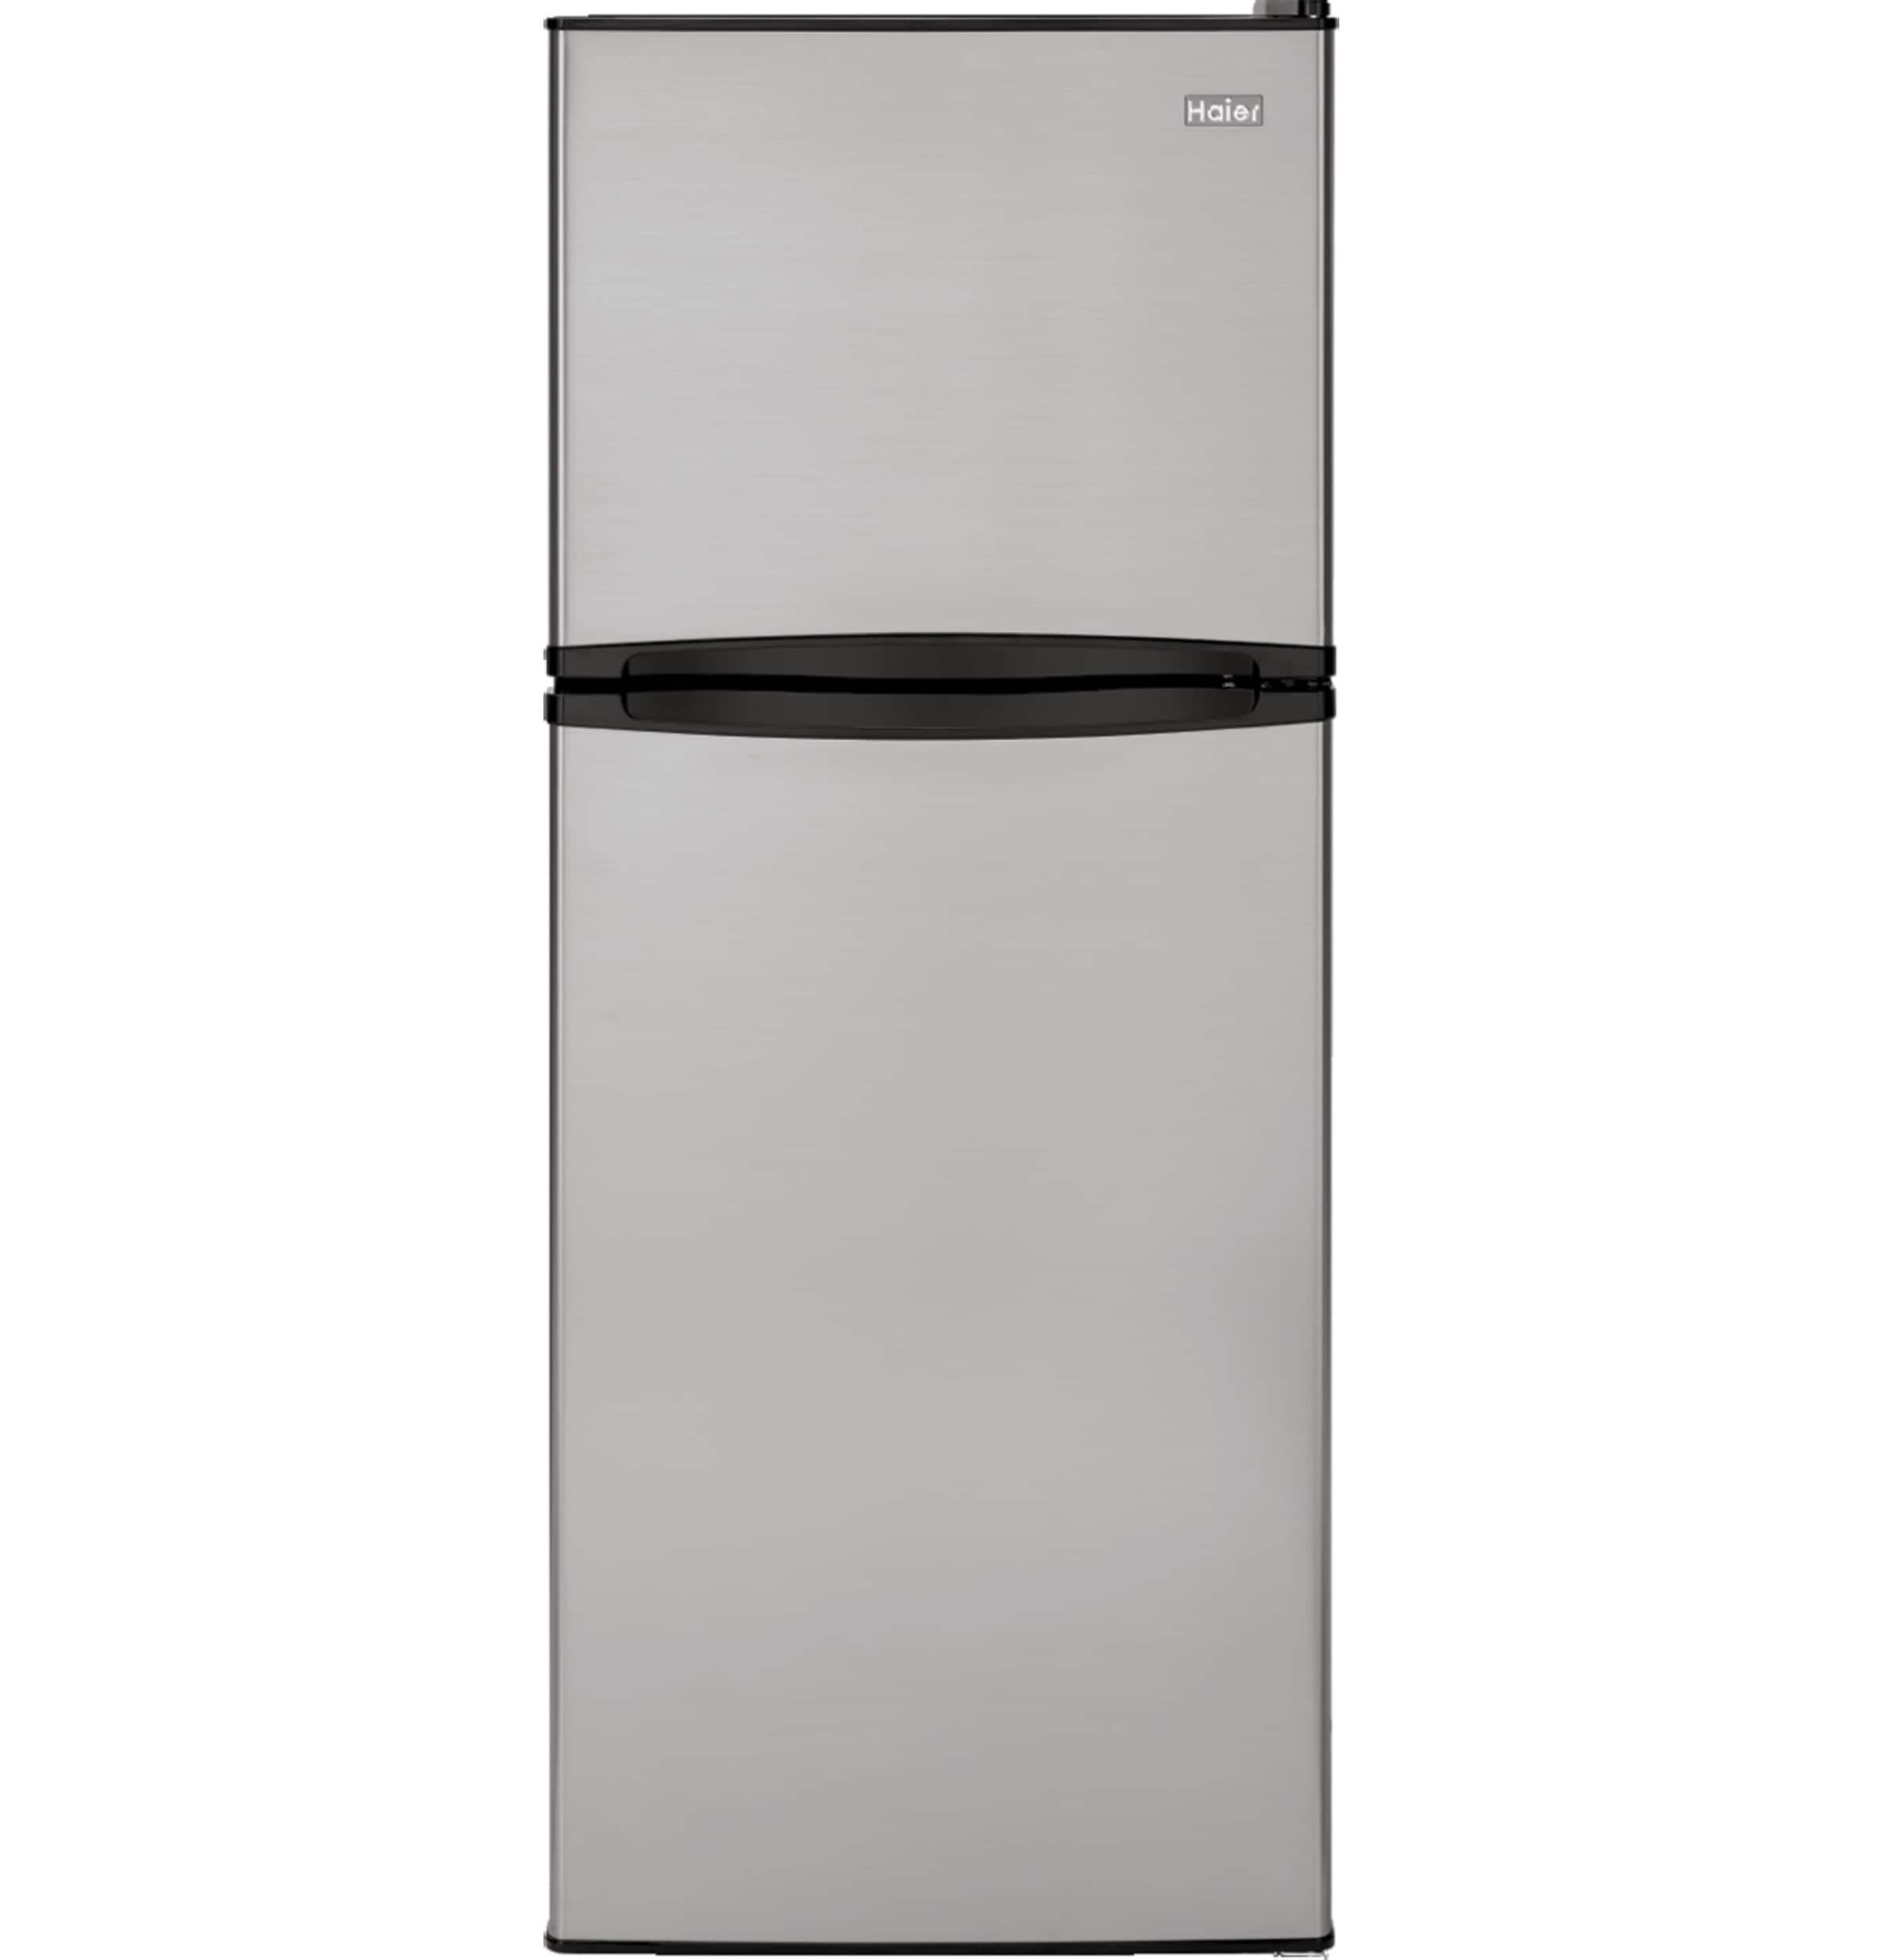 Haier 9.8-cu ft Top-Freezer Refrigerator (Stainless) in the Top 